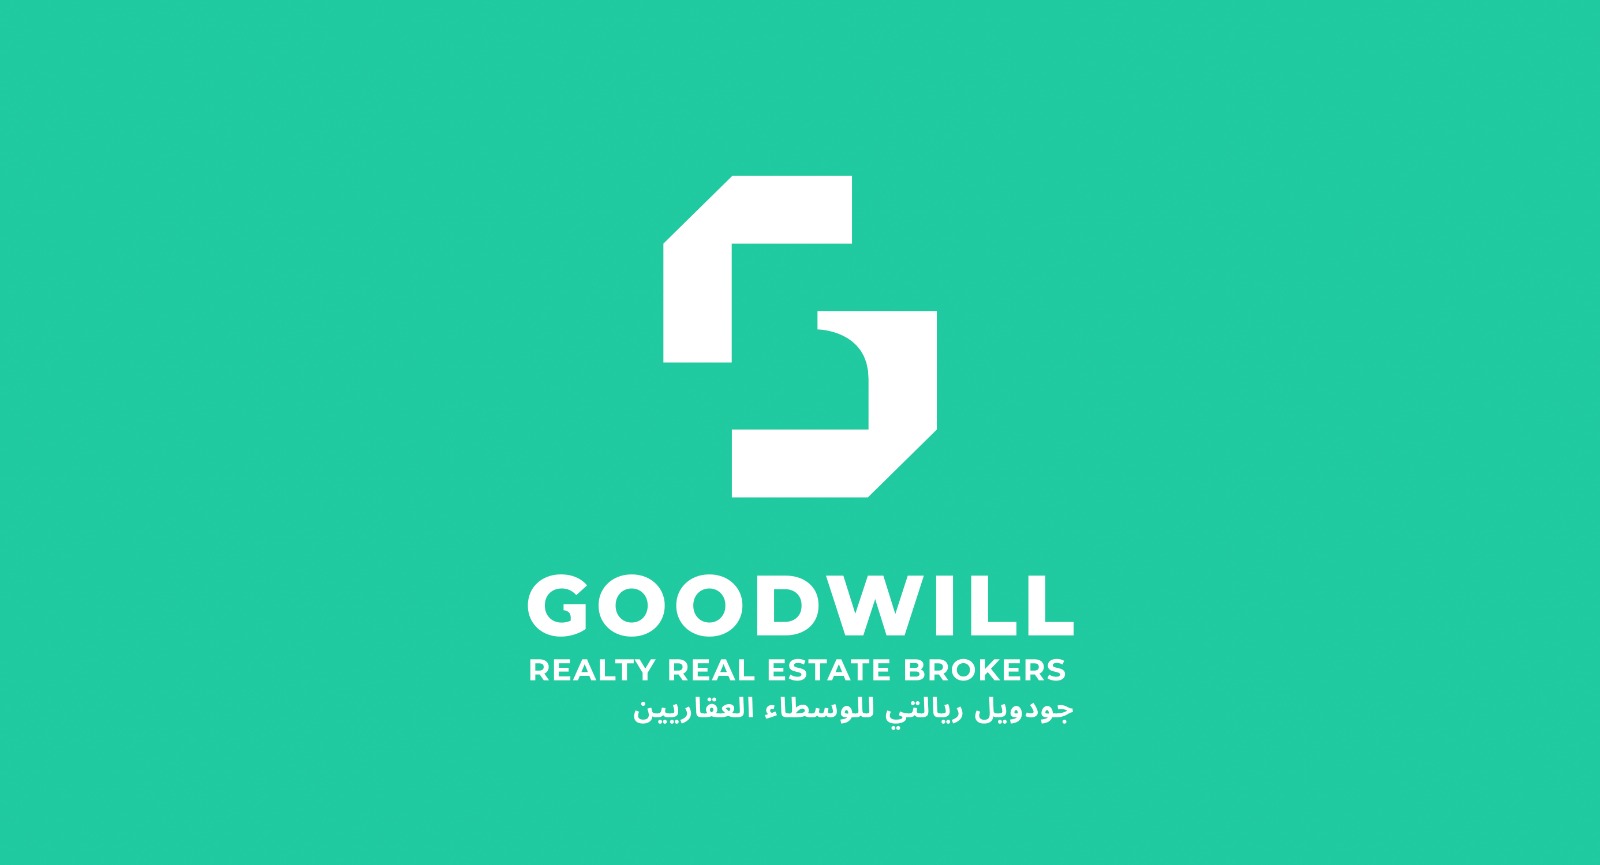 Goodwill Realty Real Estate